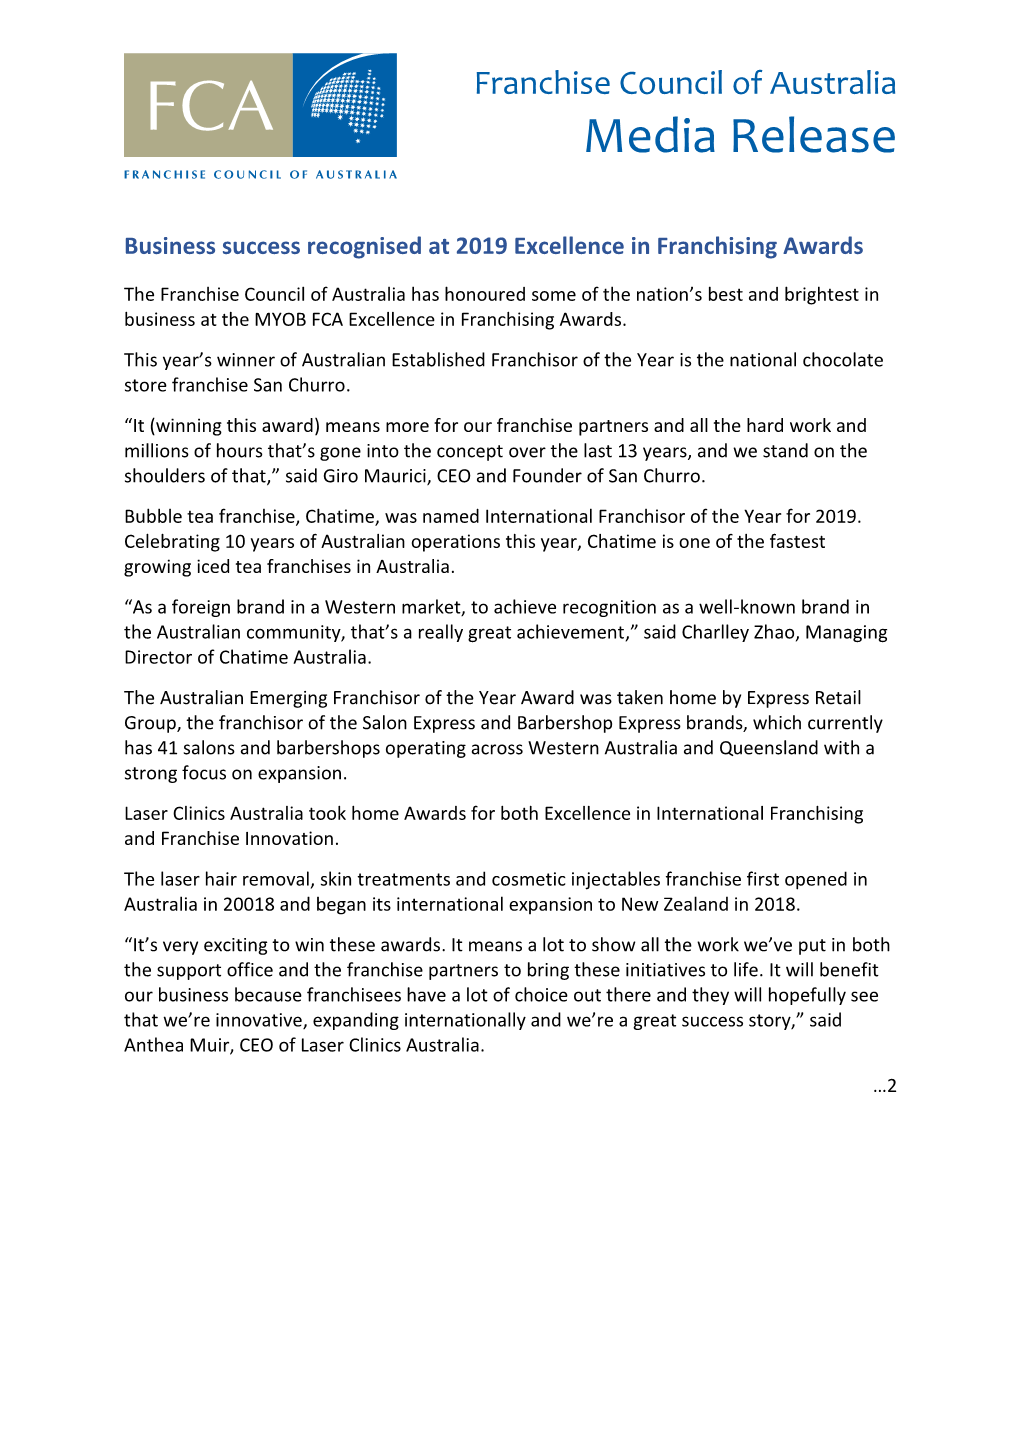 Media Release 2019 Awards Recognise Outstanding Performance